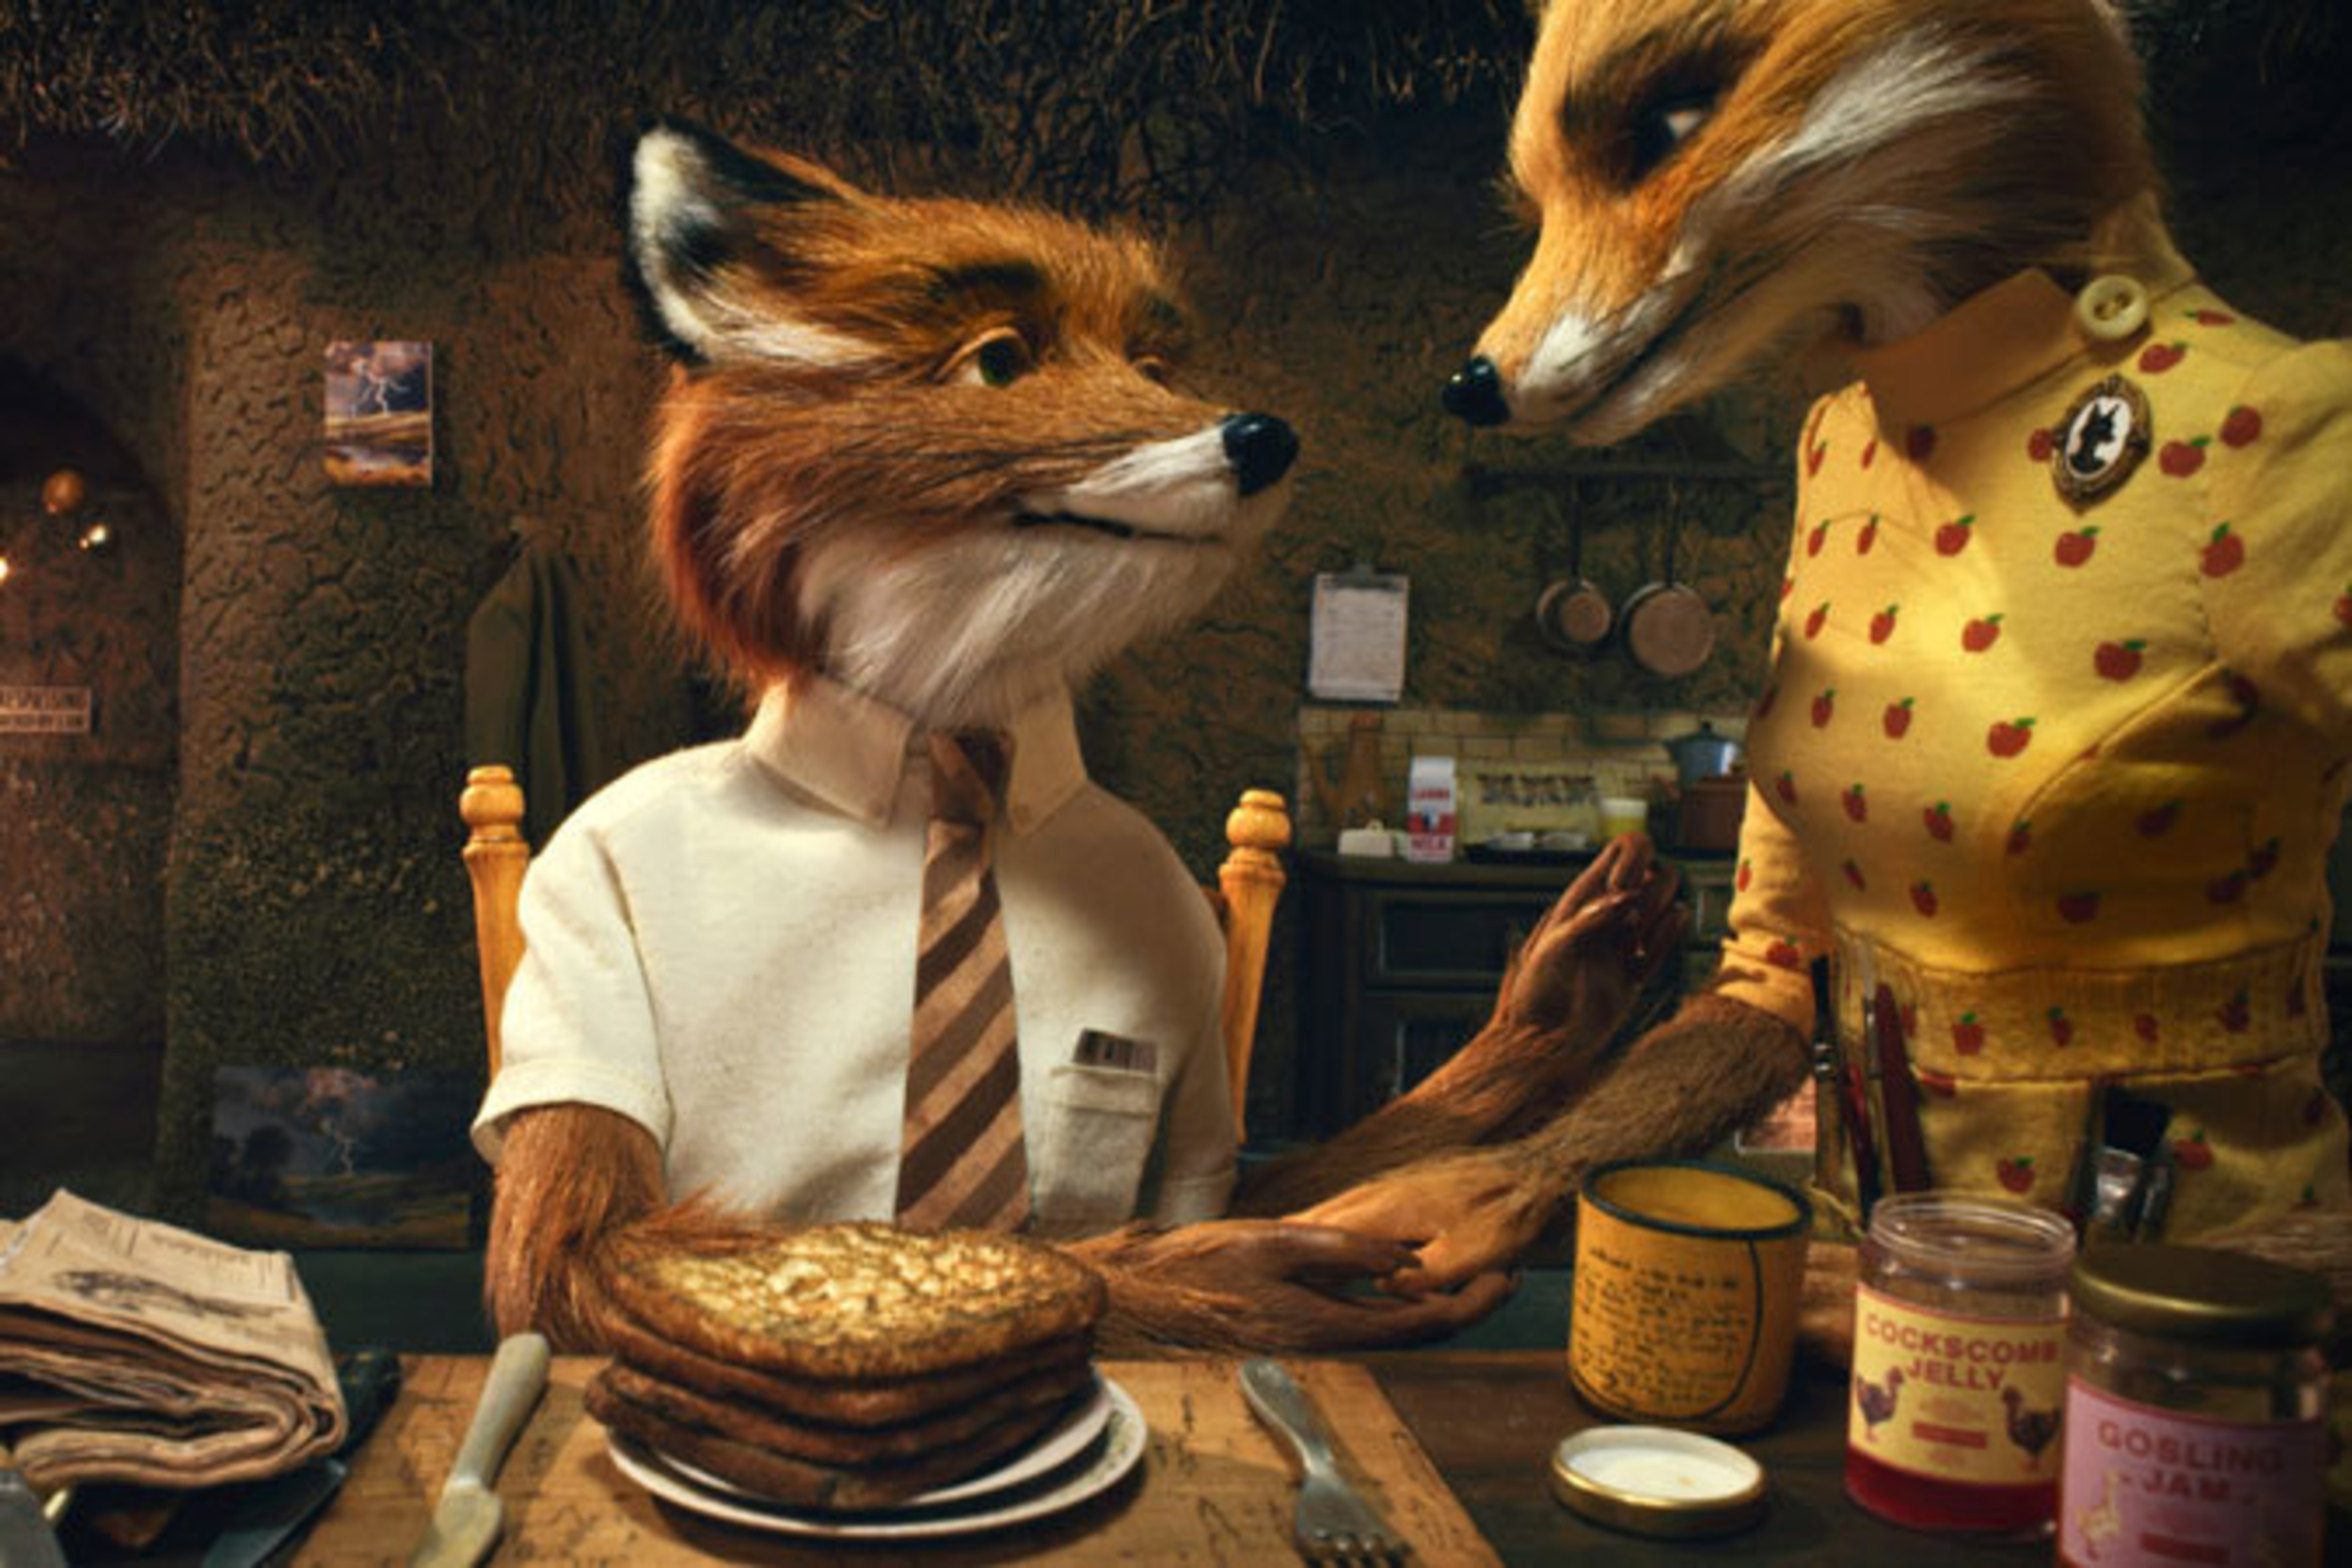 <p>Based on the classic novel by Roald Dahl, director Wes Anderson brings his unique flare and tone to <em>Fantastic Mr. Fox</em>. When Mr. Fox returns to his old habits of stealing, three farmers threaten him and his kind. The stop-motion animation in the film is so detailed and precise that you can quite literally see every fiber and hair of Mr. Fox and his friends. Anderson brings his signature aesthetic style to the animation landscape with an all-star cast led by George Clooney and Meryl Streep. </p><p>You may also like: <a href='https://www.yardbarker.com/entertainment/articles/the_best_sitcom_bars_and_restaurants_022924/s1__38796474'>The best sitcom bars and restaurants</a></p>